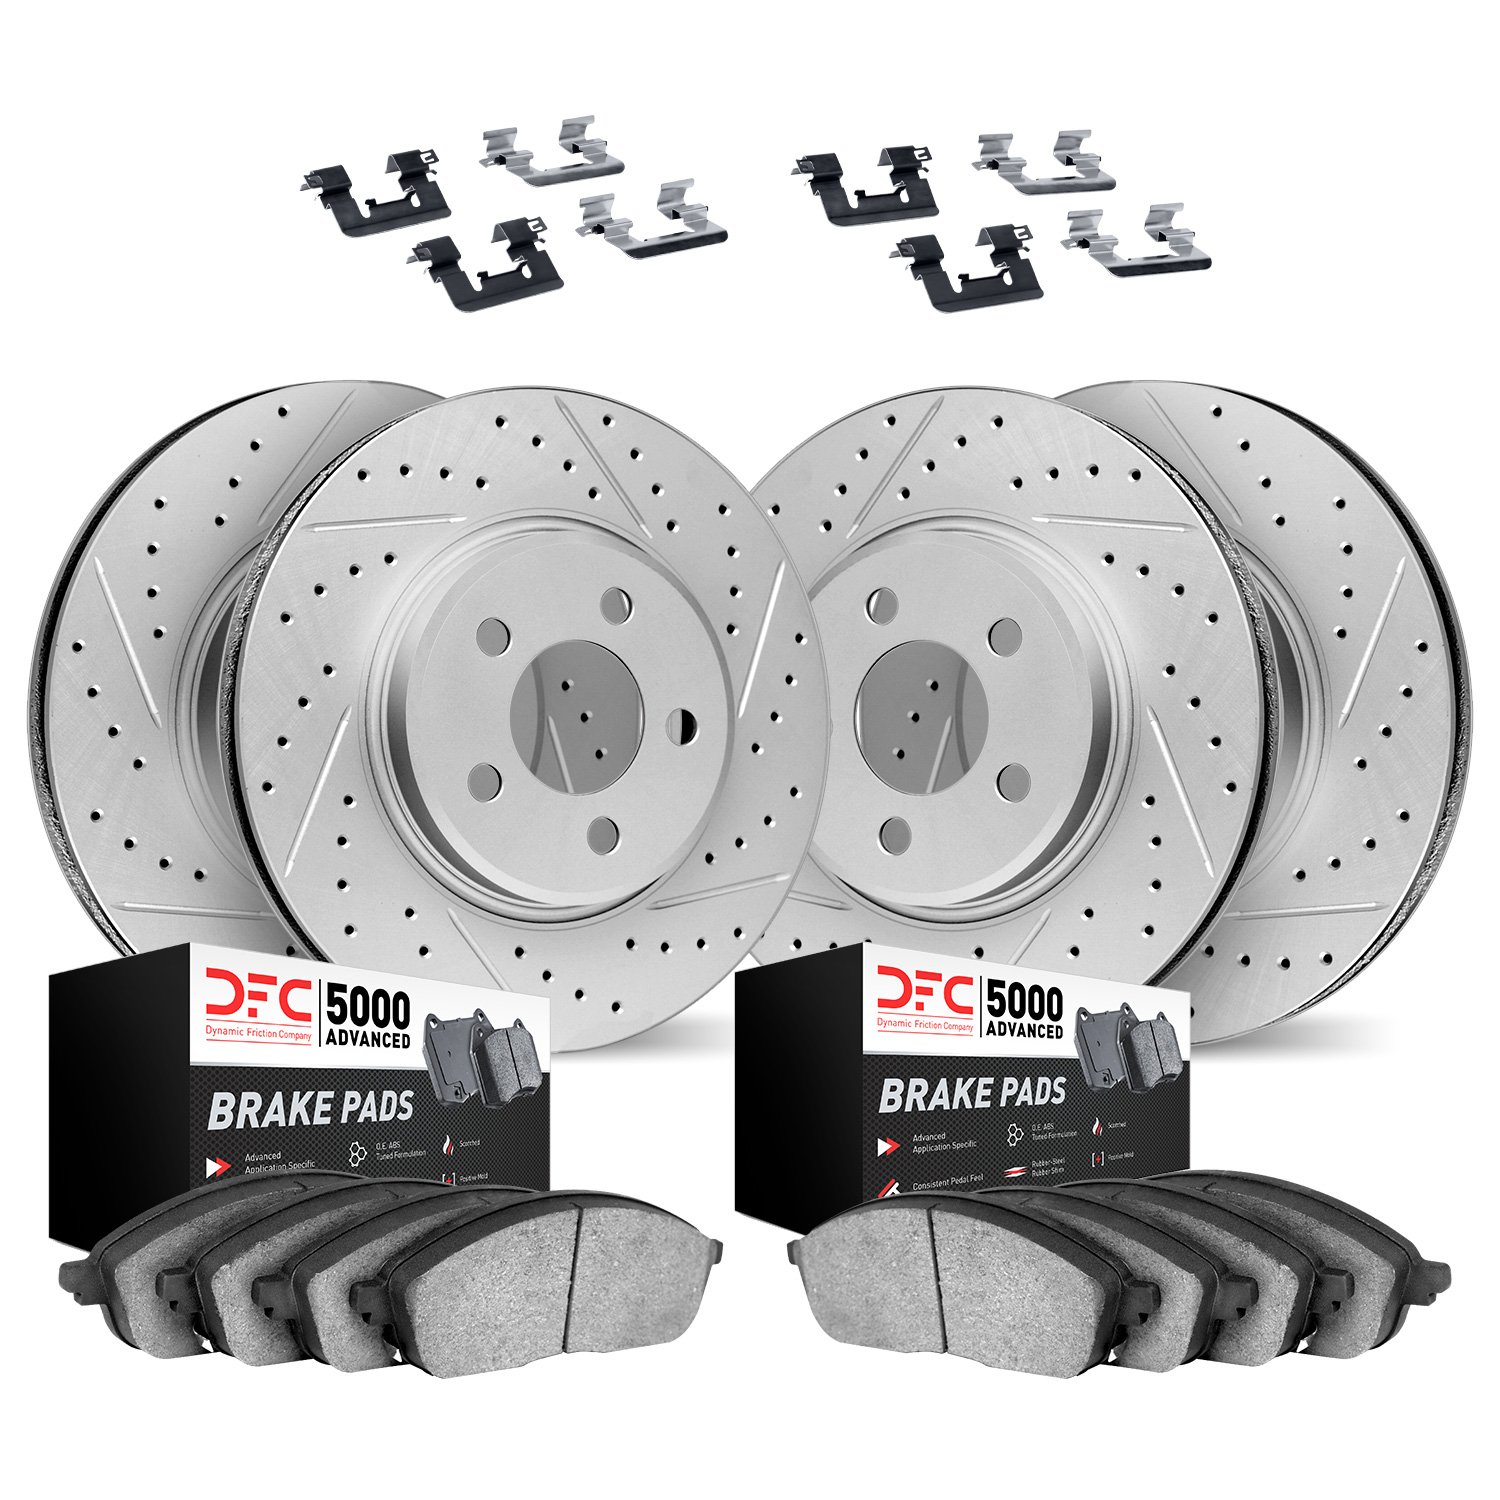 2514-67070 Geoperformance Drilled/Slotted Rotors w/5000 Advanced Brake Pads Kit & Hardware, 2009-2016 Renault, Position: Front a